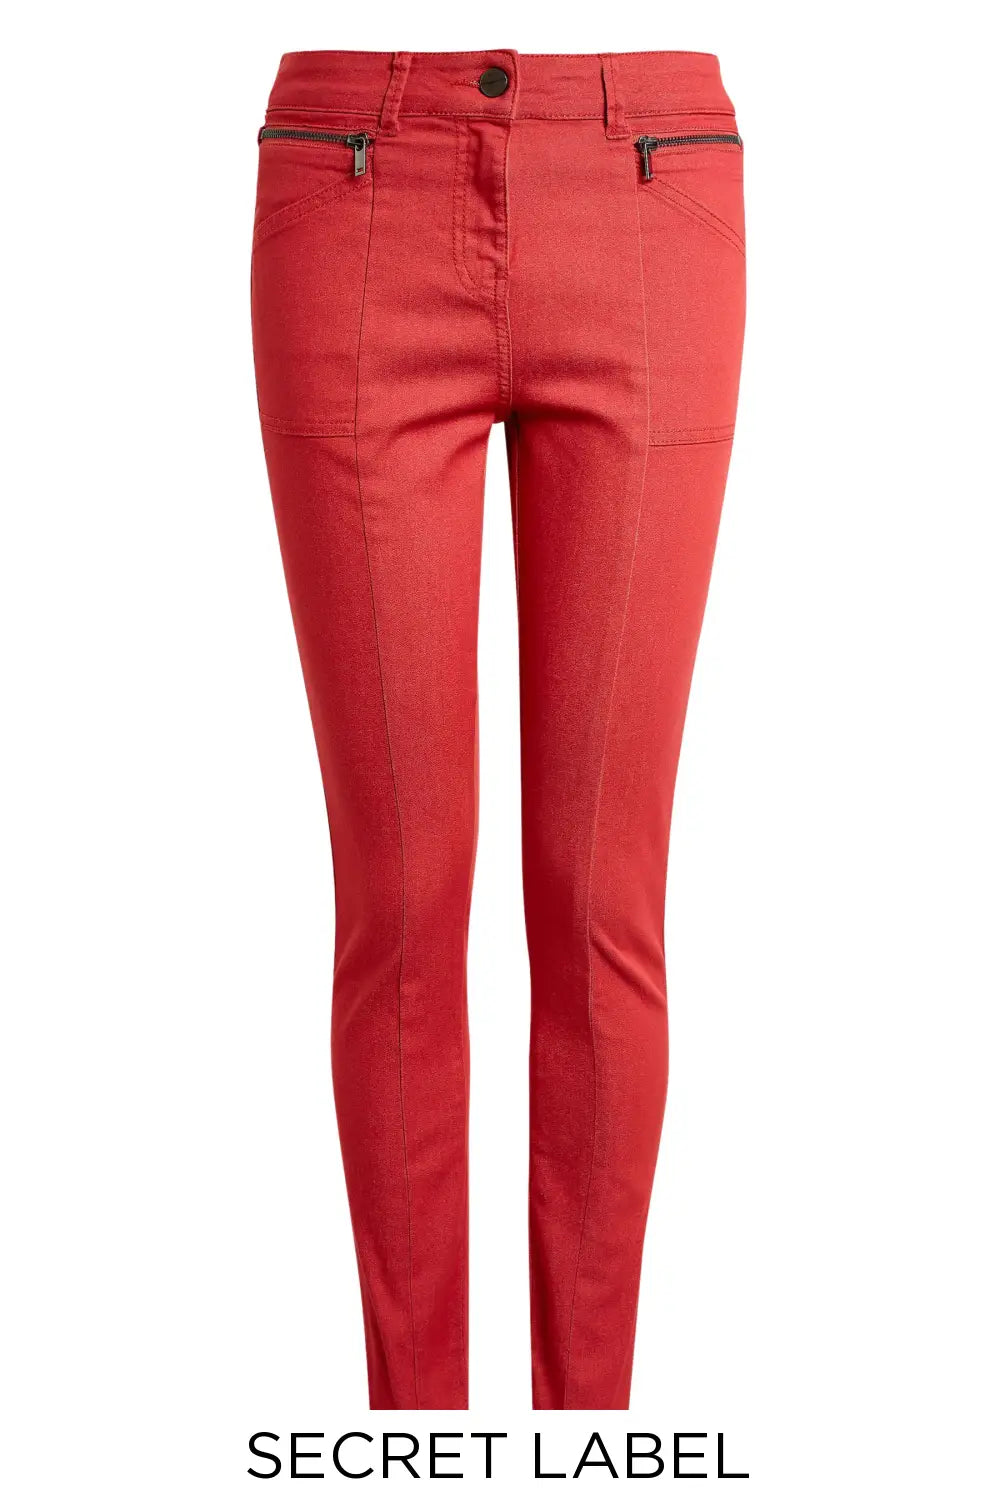 Secret Label Soft Touch Skinny Zip Trousers Red / 8 / Short